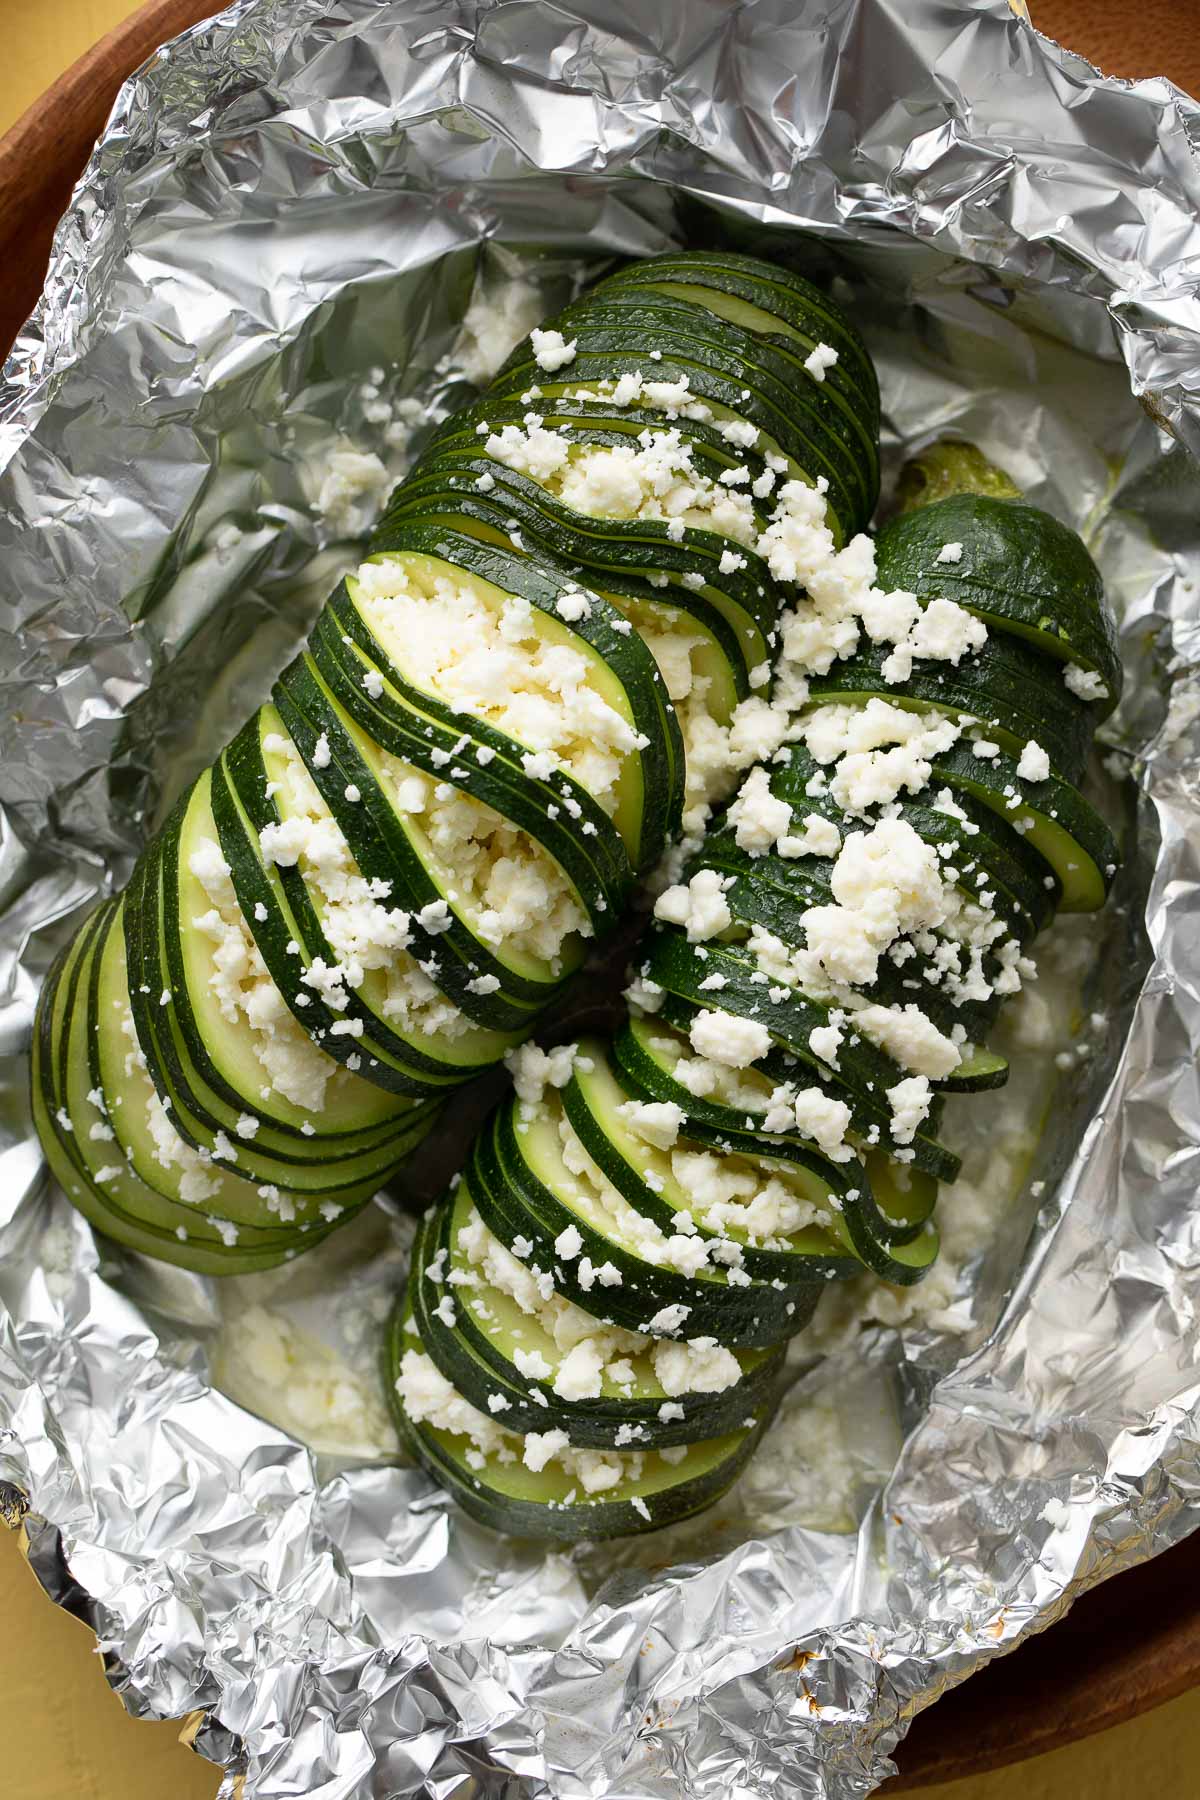 Hasselback Sliced Zucchini with Feta Baked in Foil Pouch